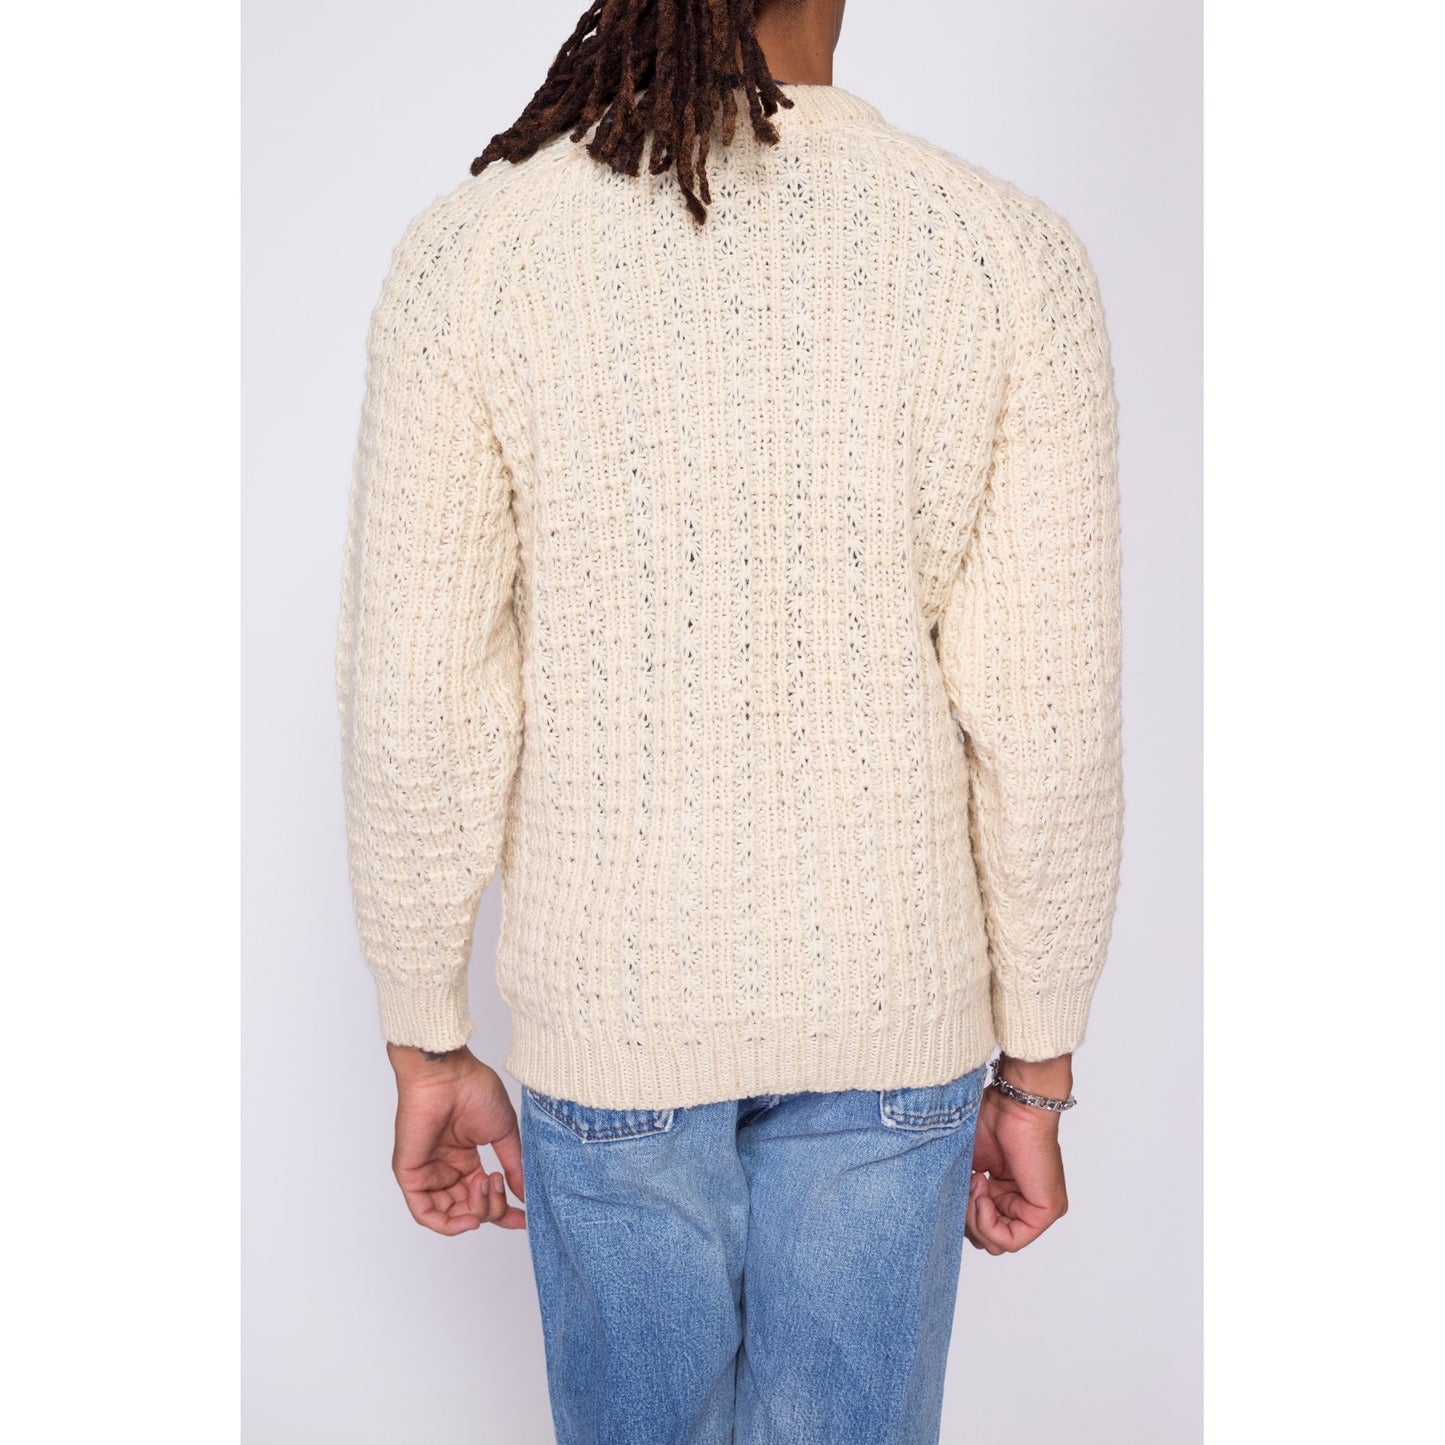 70s McRitchie Of Edinburgh Cable Knit Sweater - Men's Small Short | Vintage Cream Wool Fisherman Pullover Jumper